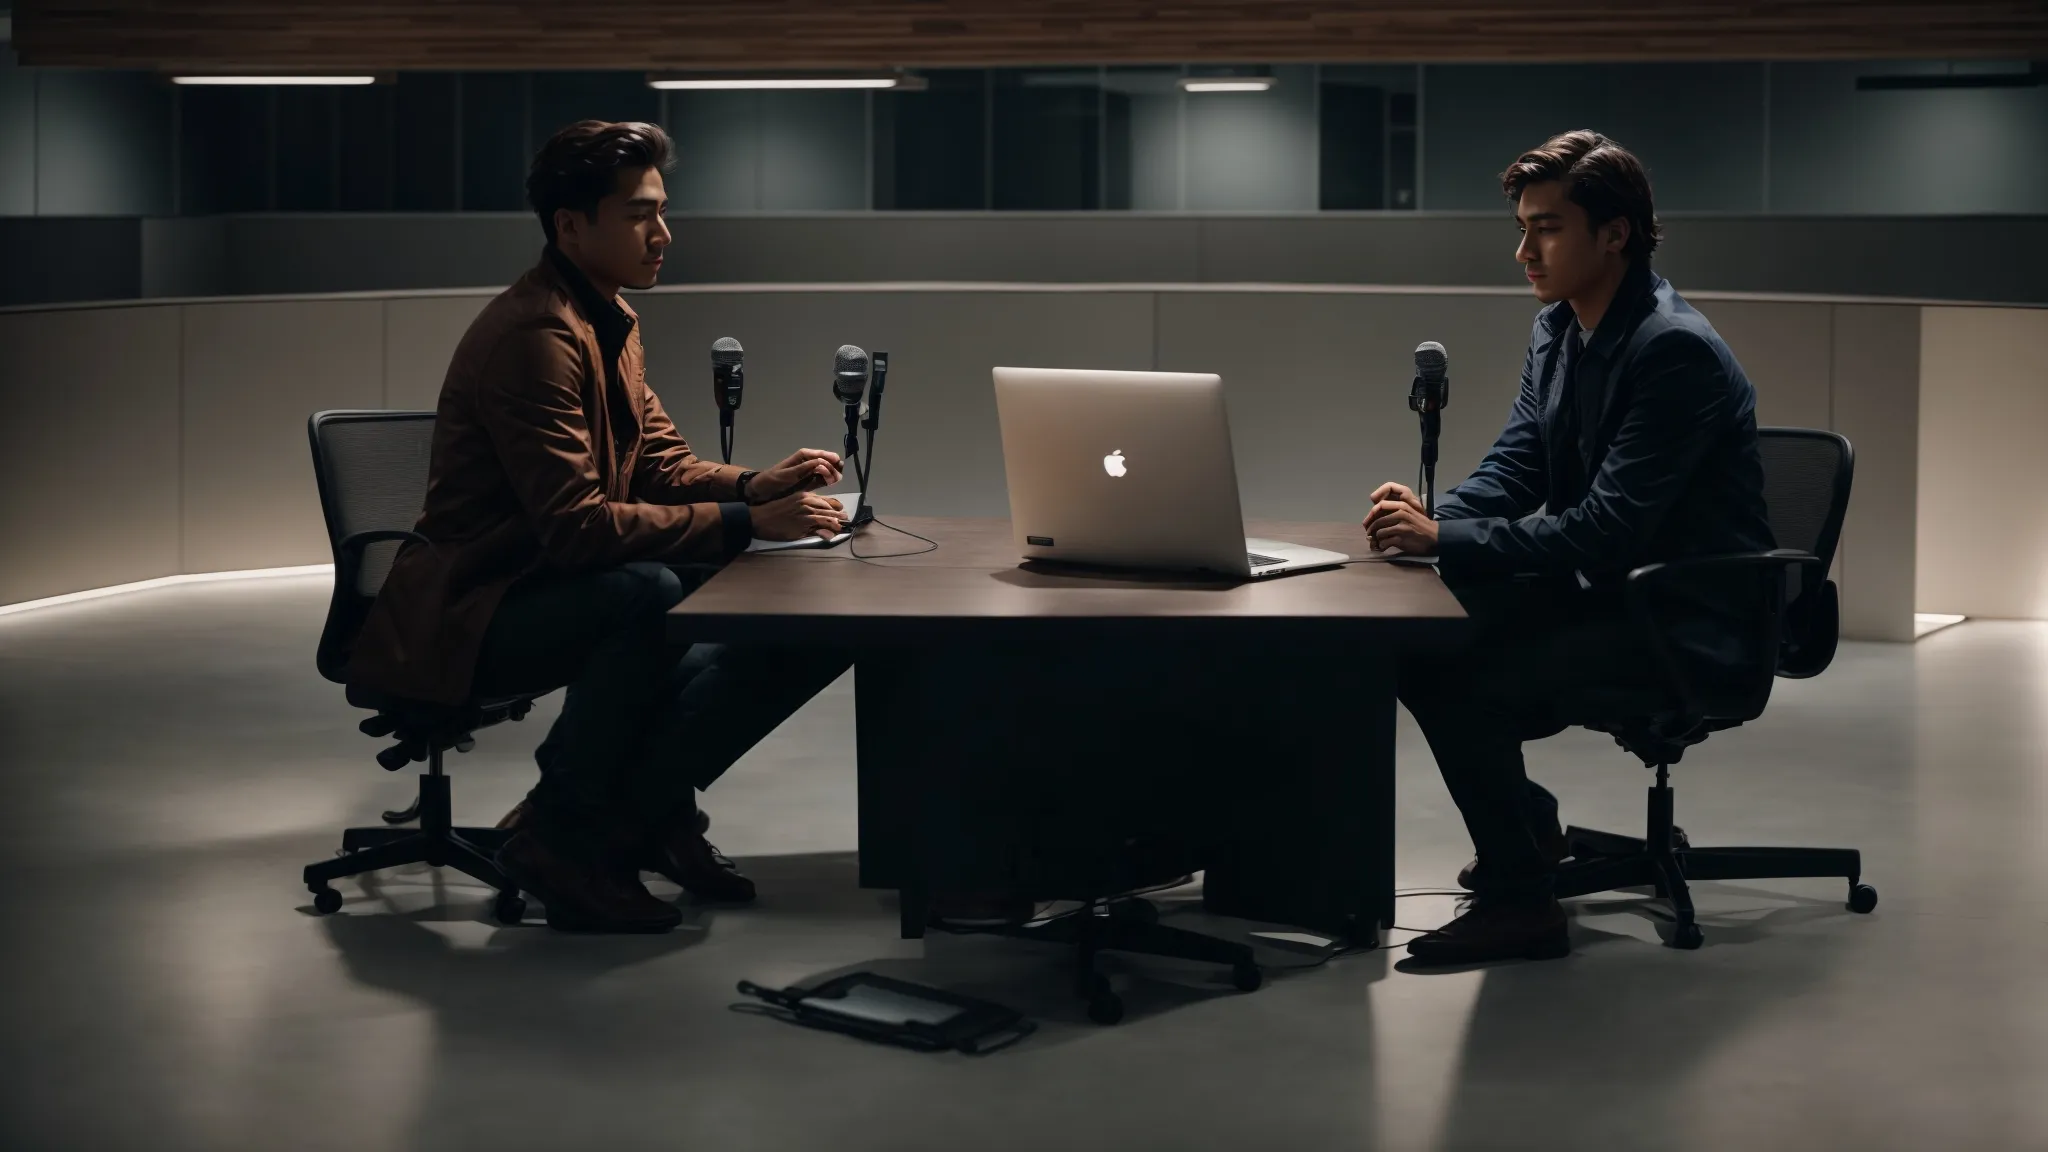 two people sit in a modern studio, speaking into microphones with a laptop open in front of them.